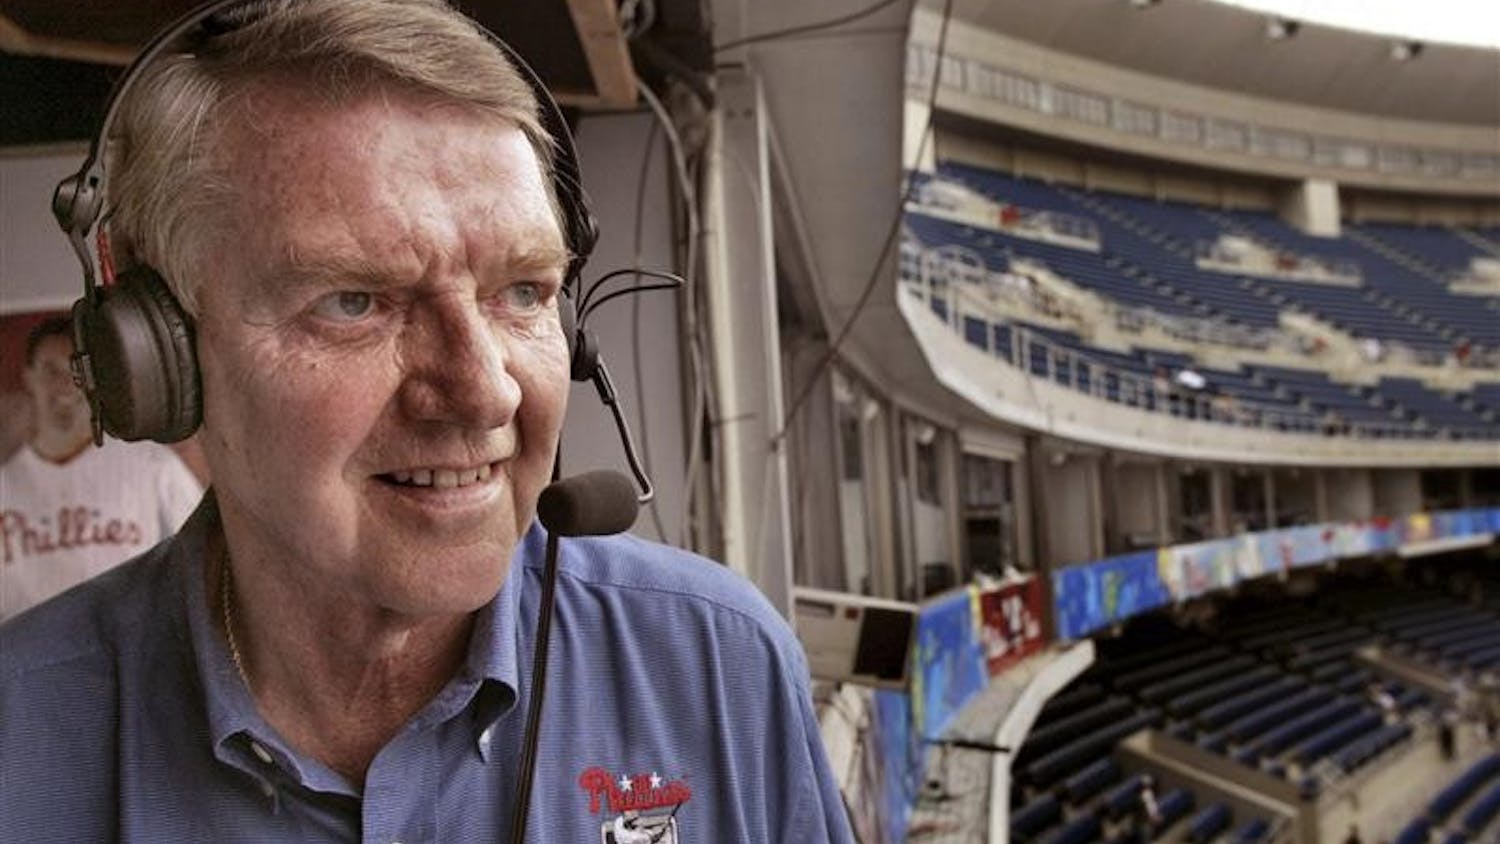 In this July 2, 2002 file photo, Philadelphia Phillies announcer Harry Kalas looks out over Veterans Stadium in Philadelphia before the start of the New York Mets-Phillies game.  Kalas, who punctuated innumerable home runs with his "Outta Here!" call, died Monday after being found in the broadcast booth before a game against the Washington Nationals. He was 73. 